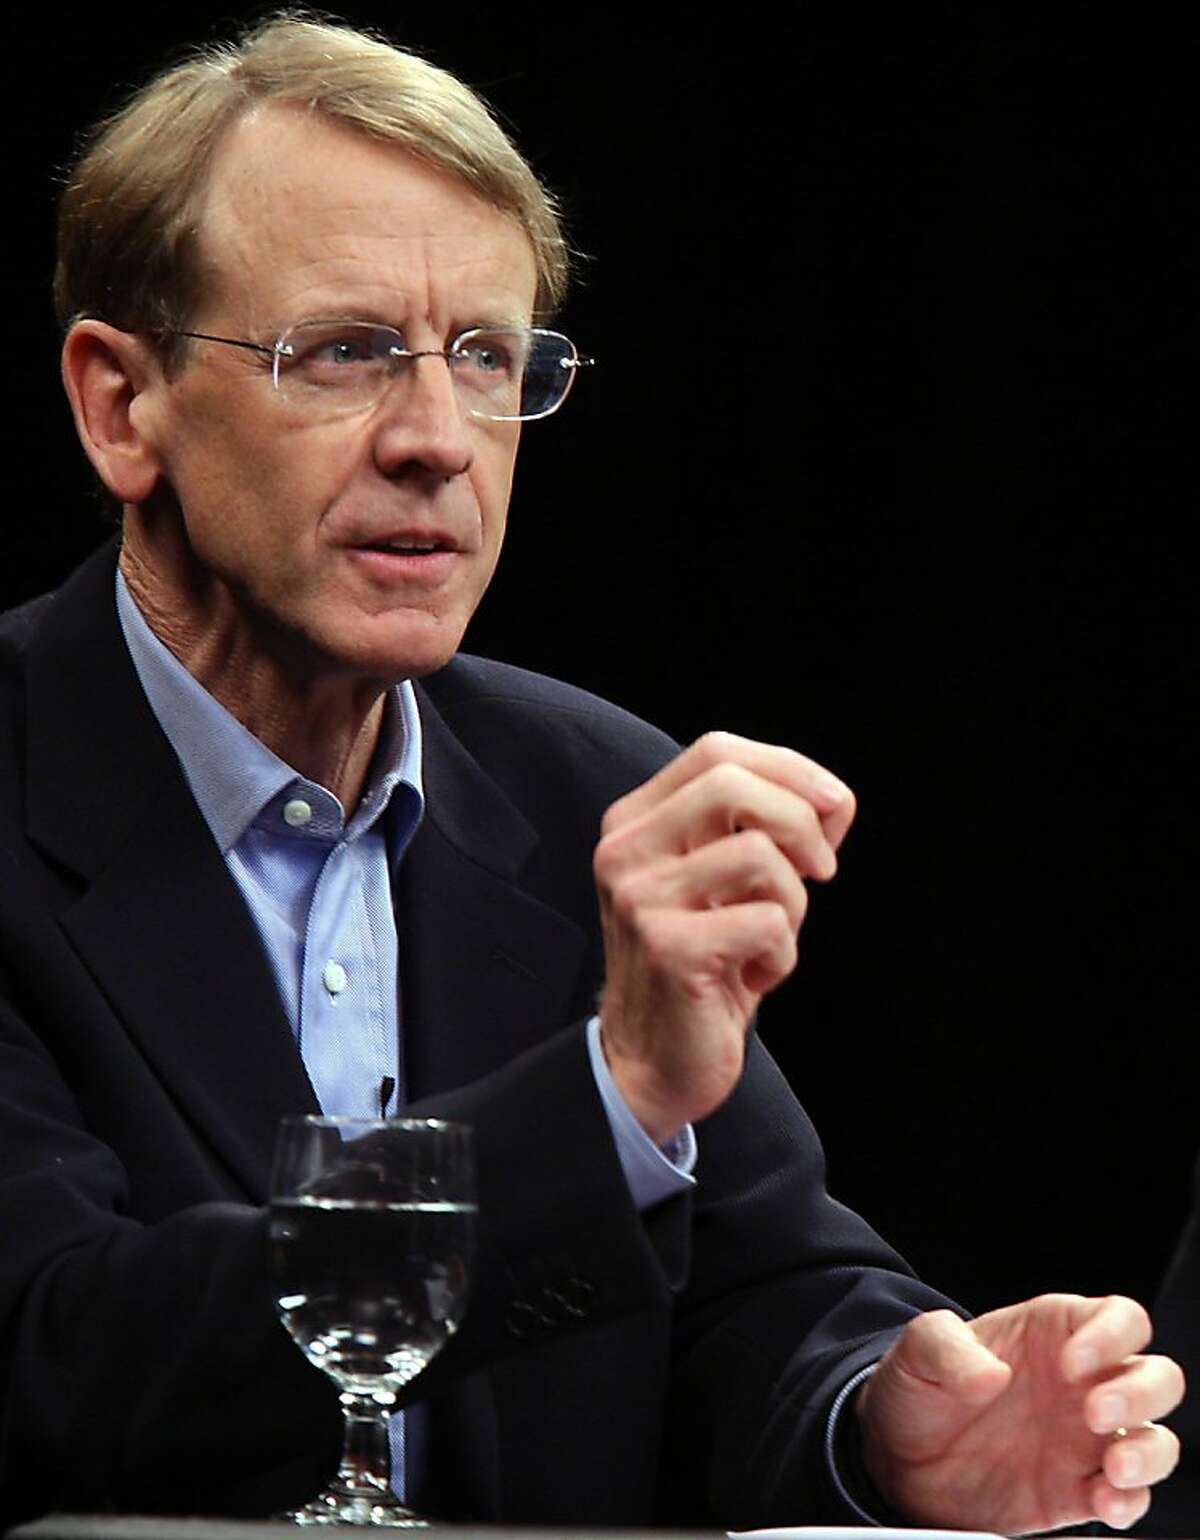 Venture capitalist John Doerr, during a round table at UC Berkeley on Oct. 11, 2007.